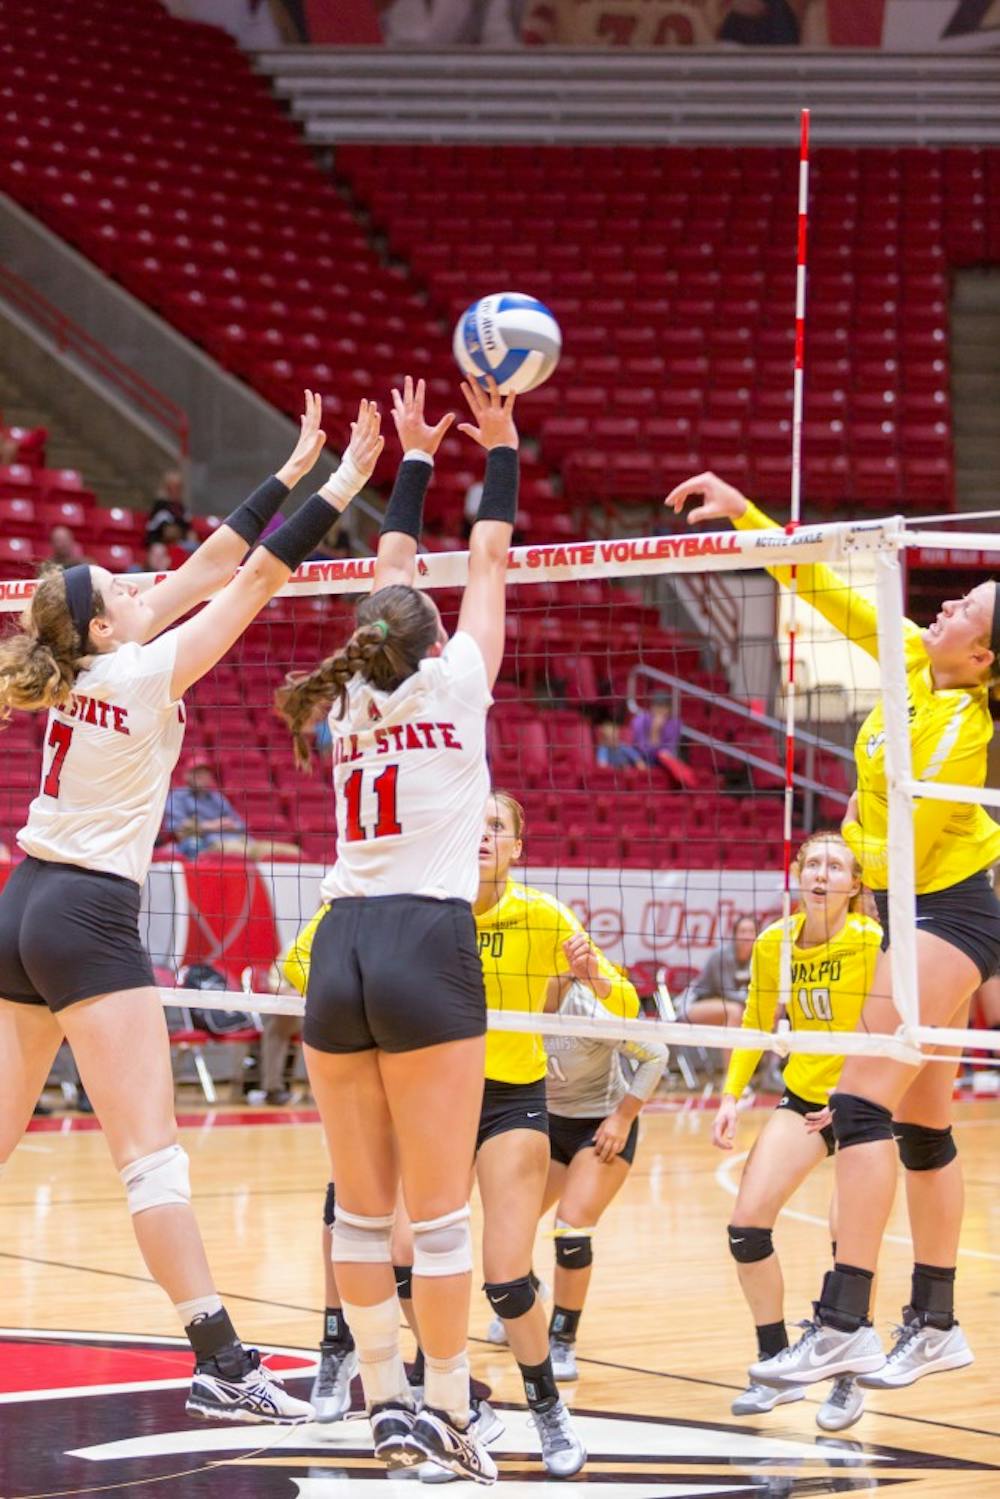 Sophomore middle hitter Emily Holland (left) and freshman setter Amber Seaman (right) jump up to block the ball at the game against Valparaiso on Sept. 16 at John E. Worthen Arena. Kyle Crawford // DN